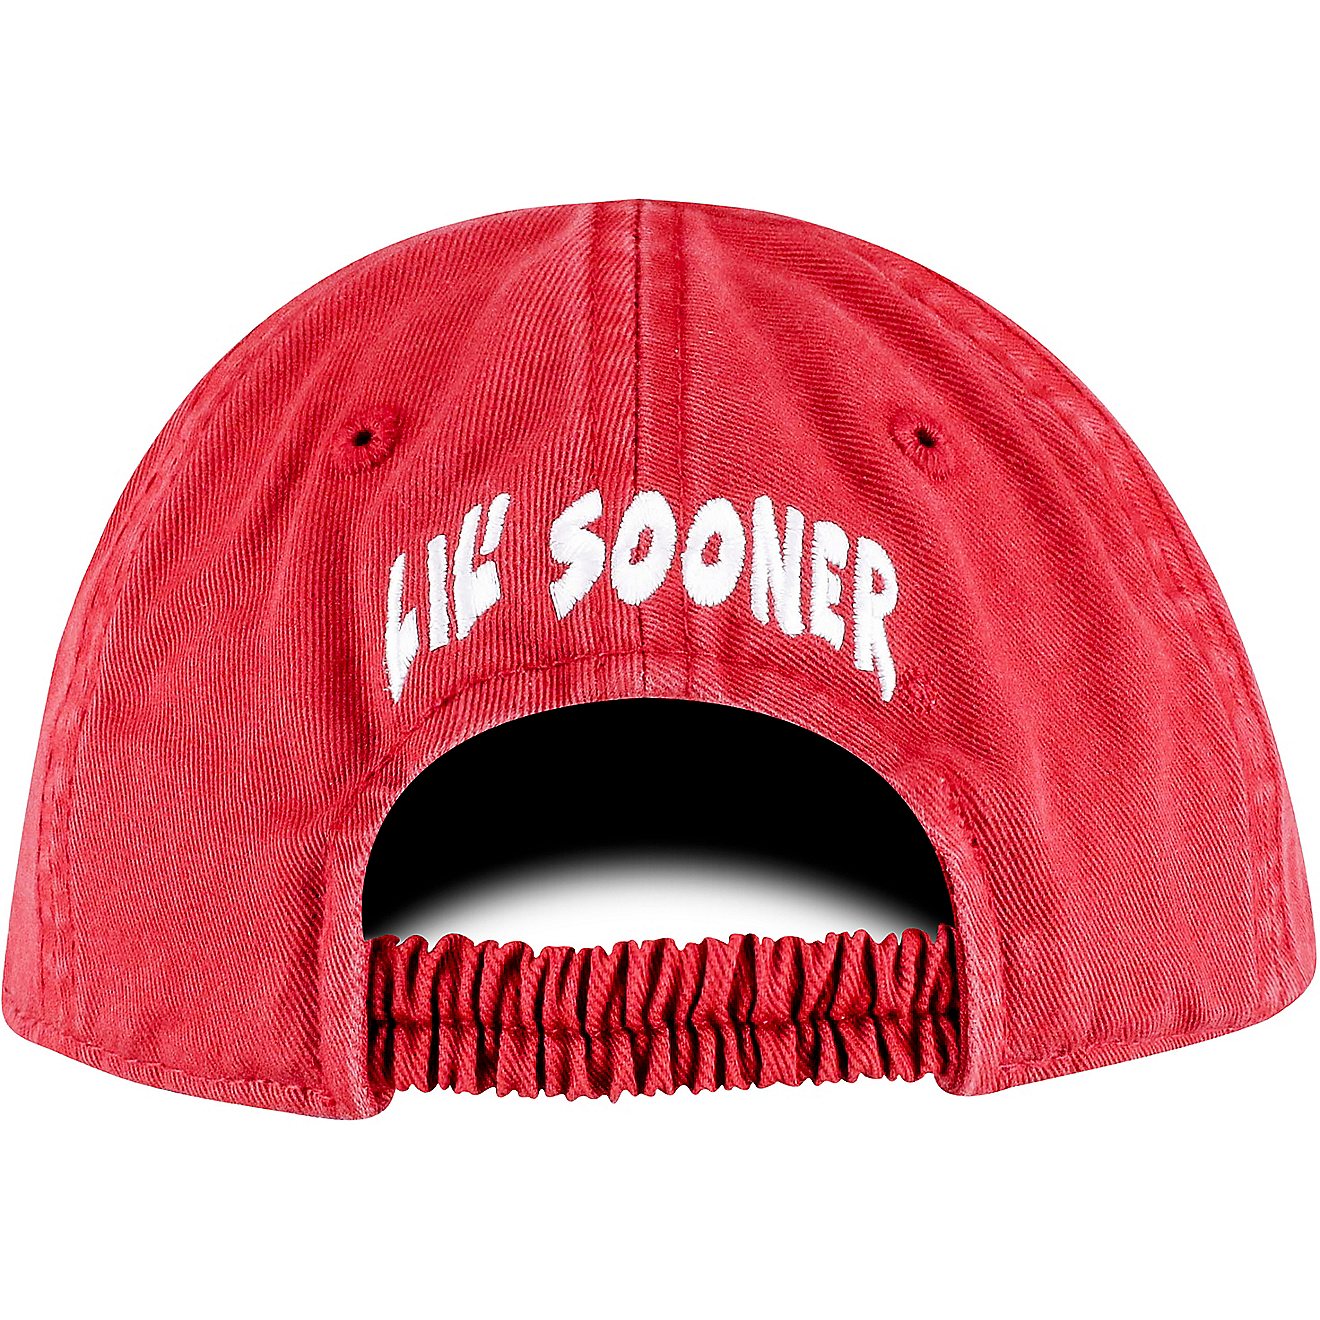 Top of the World Infants' University of Oklahoma Mini Me Adjustable Cap                                                          - view number 2